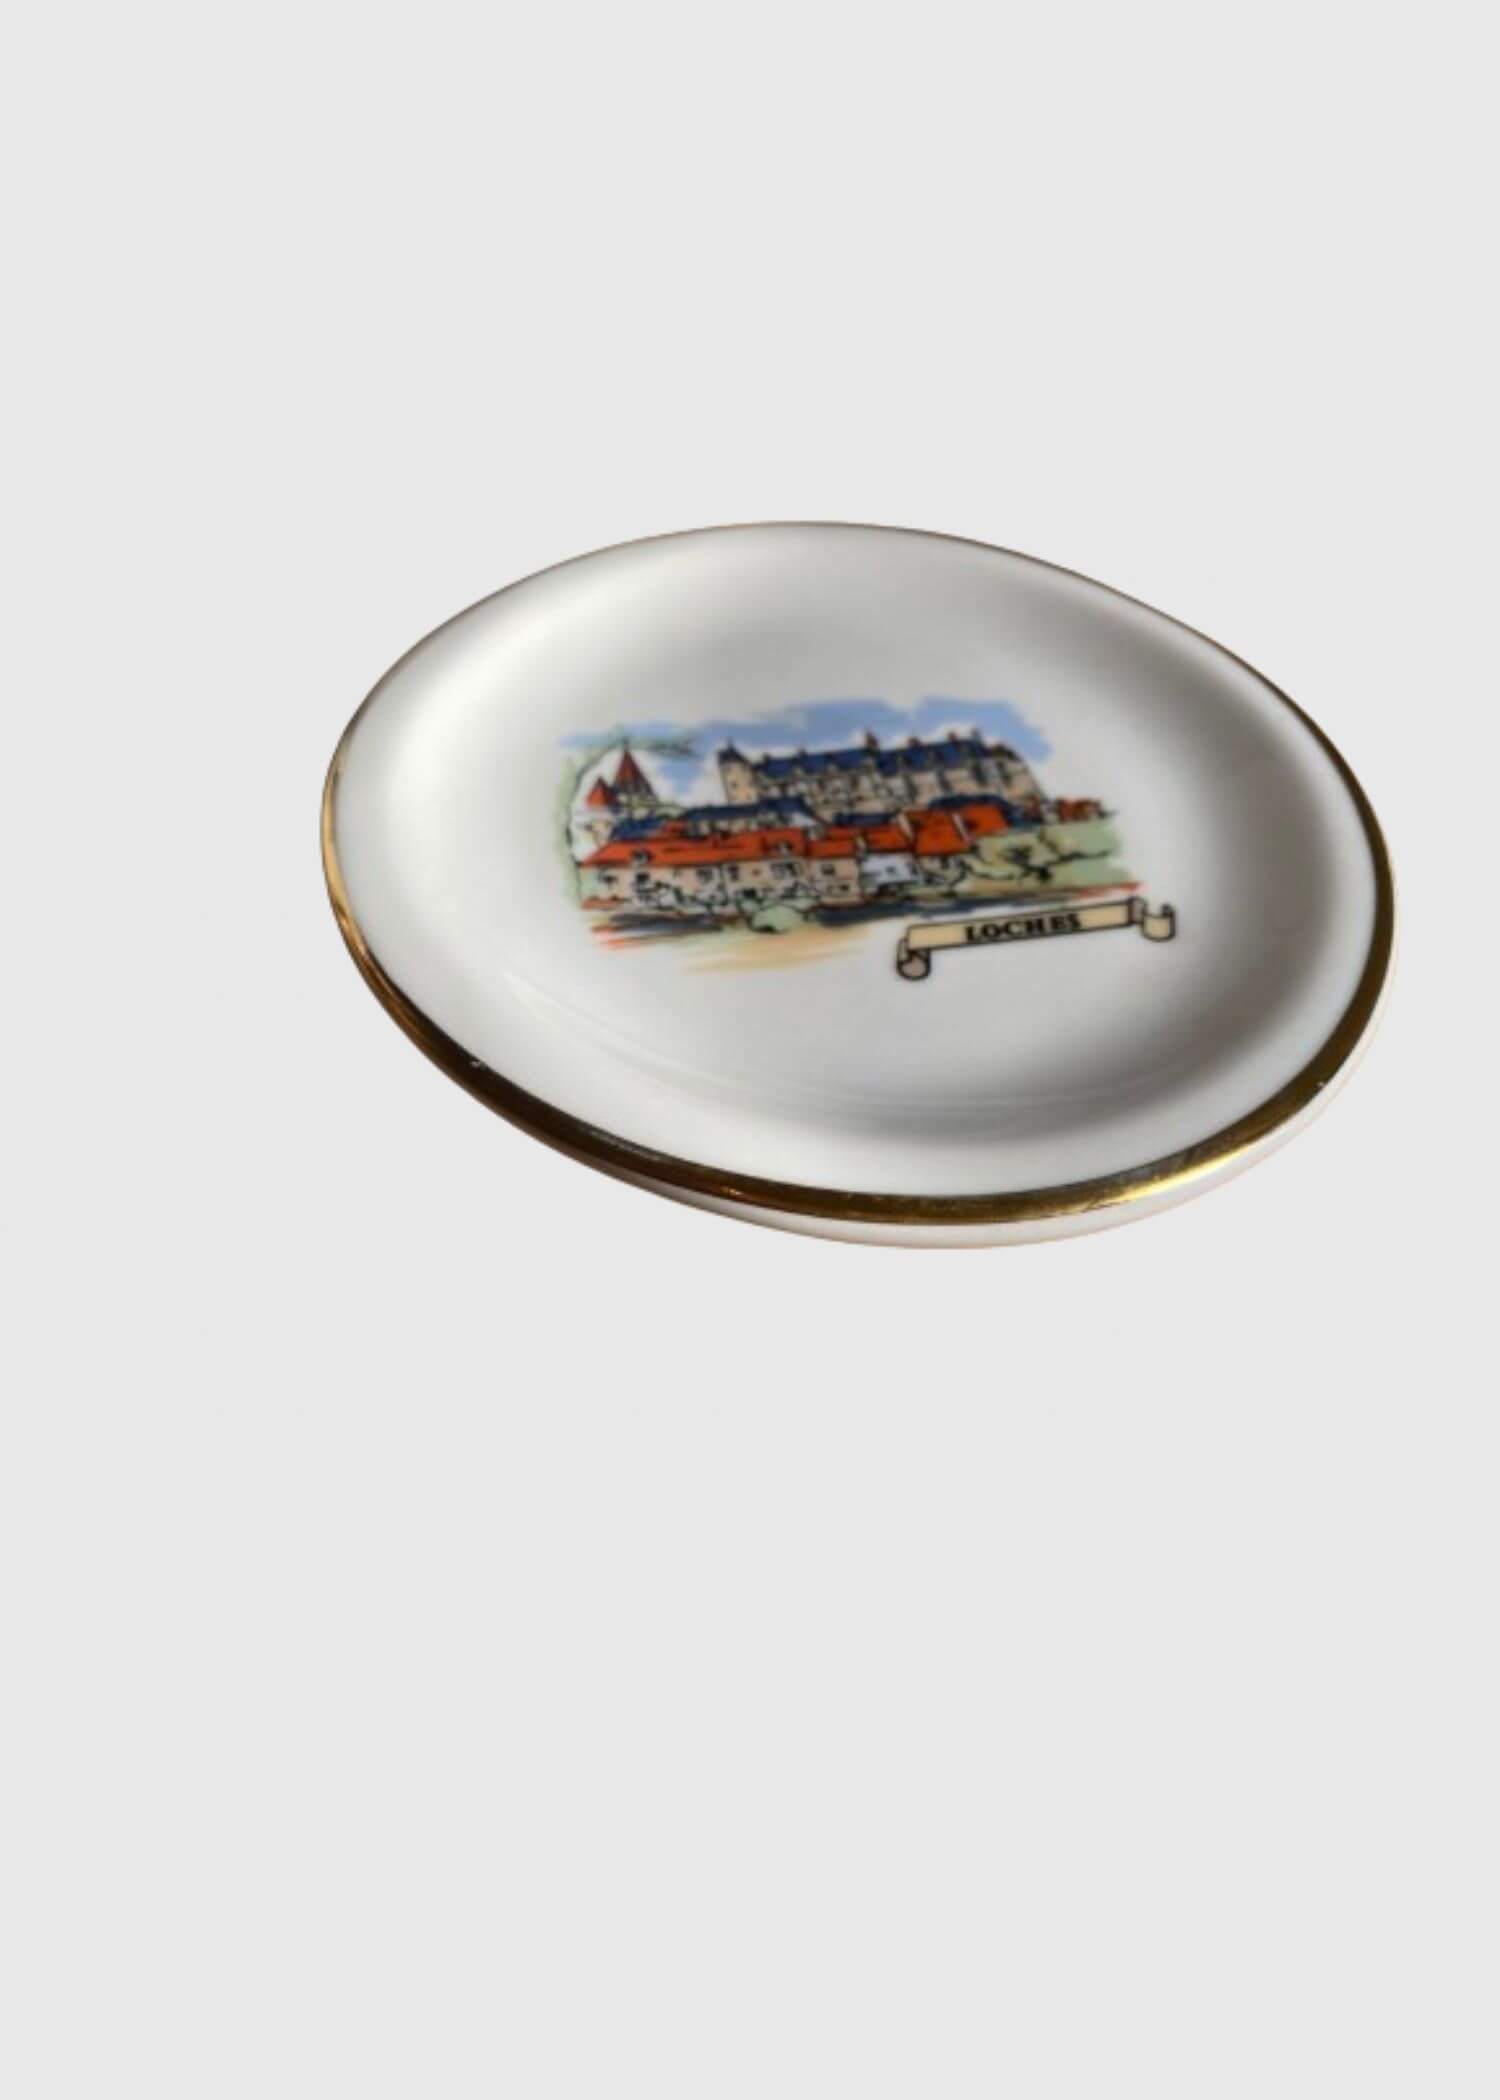 Château de Loches Porcelain Trinket Dish     Vintage Round Shaped with Castle and buildings scenic pattern Accessories Decorative Objects  - Made in Castle Loire valley France China c1980s  - Classic Collectable Ceramics Trending Collectors antiques